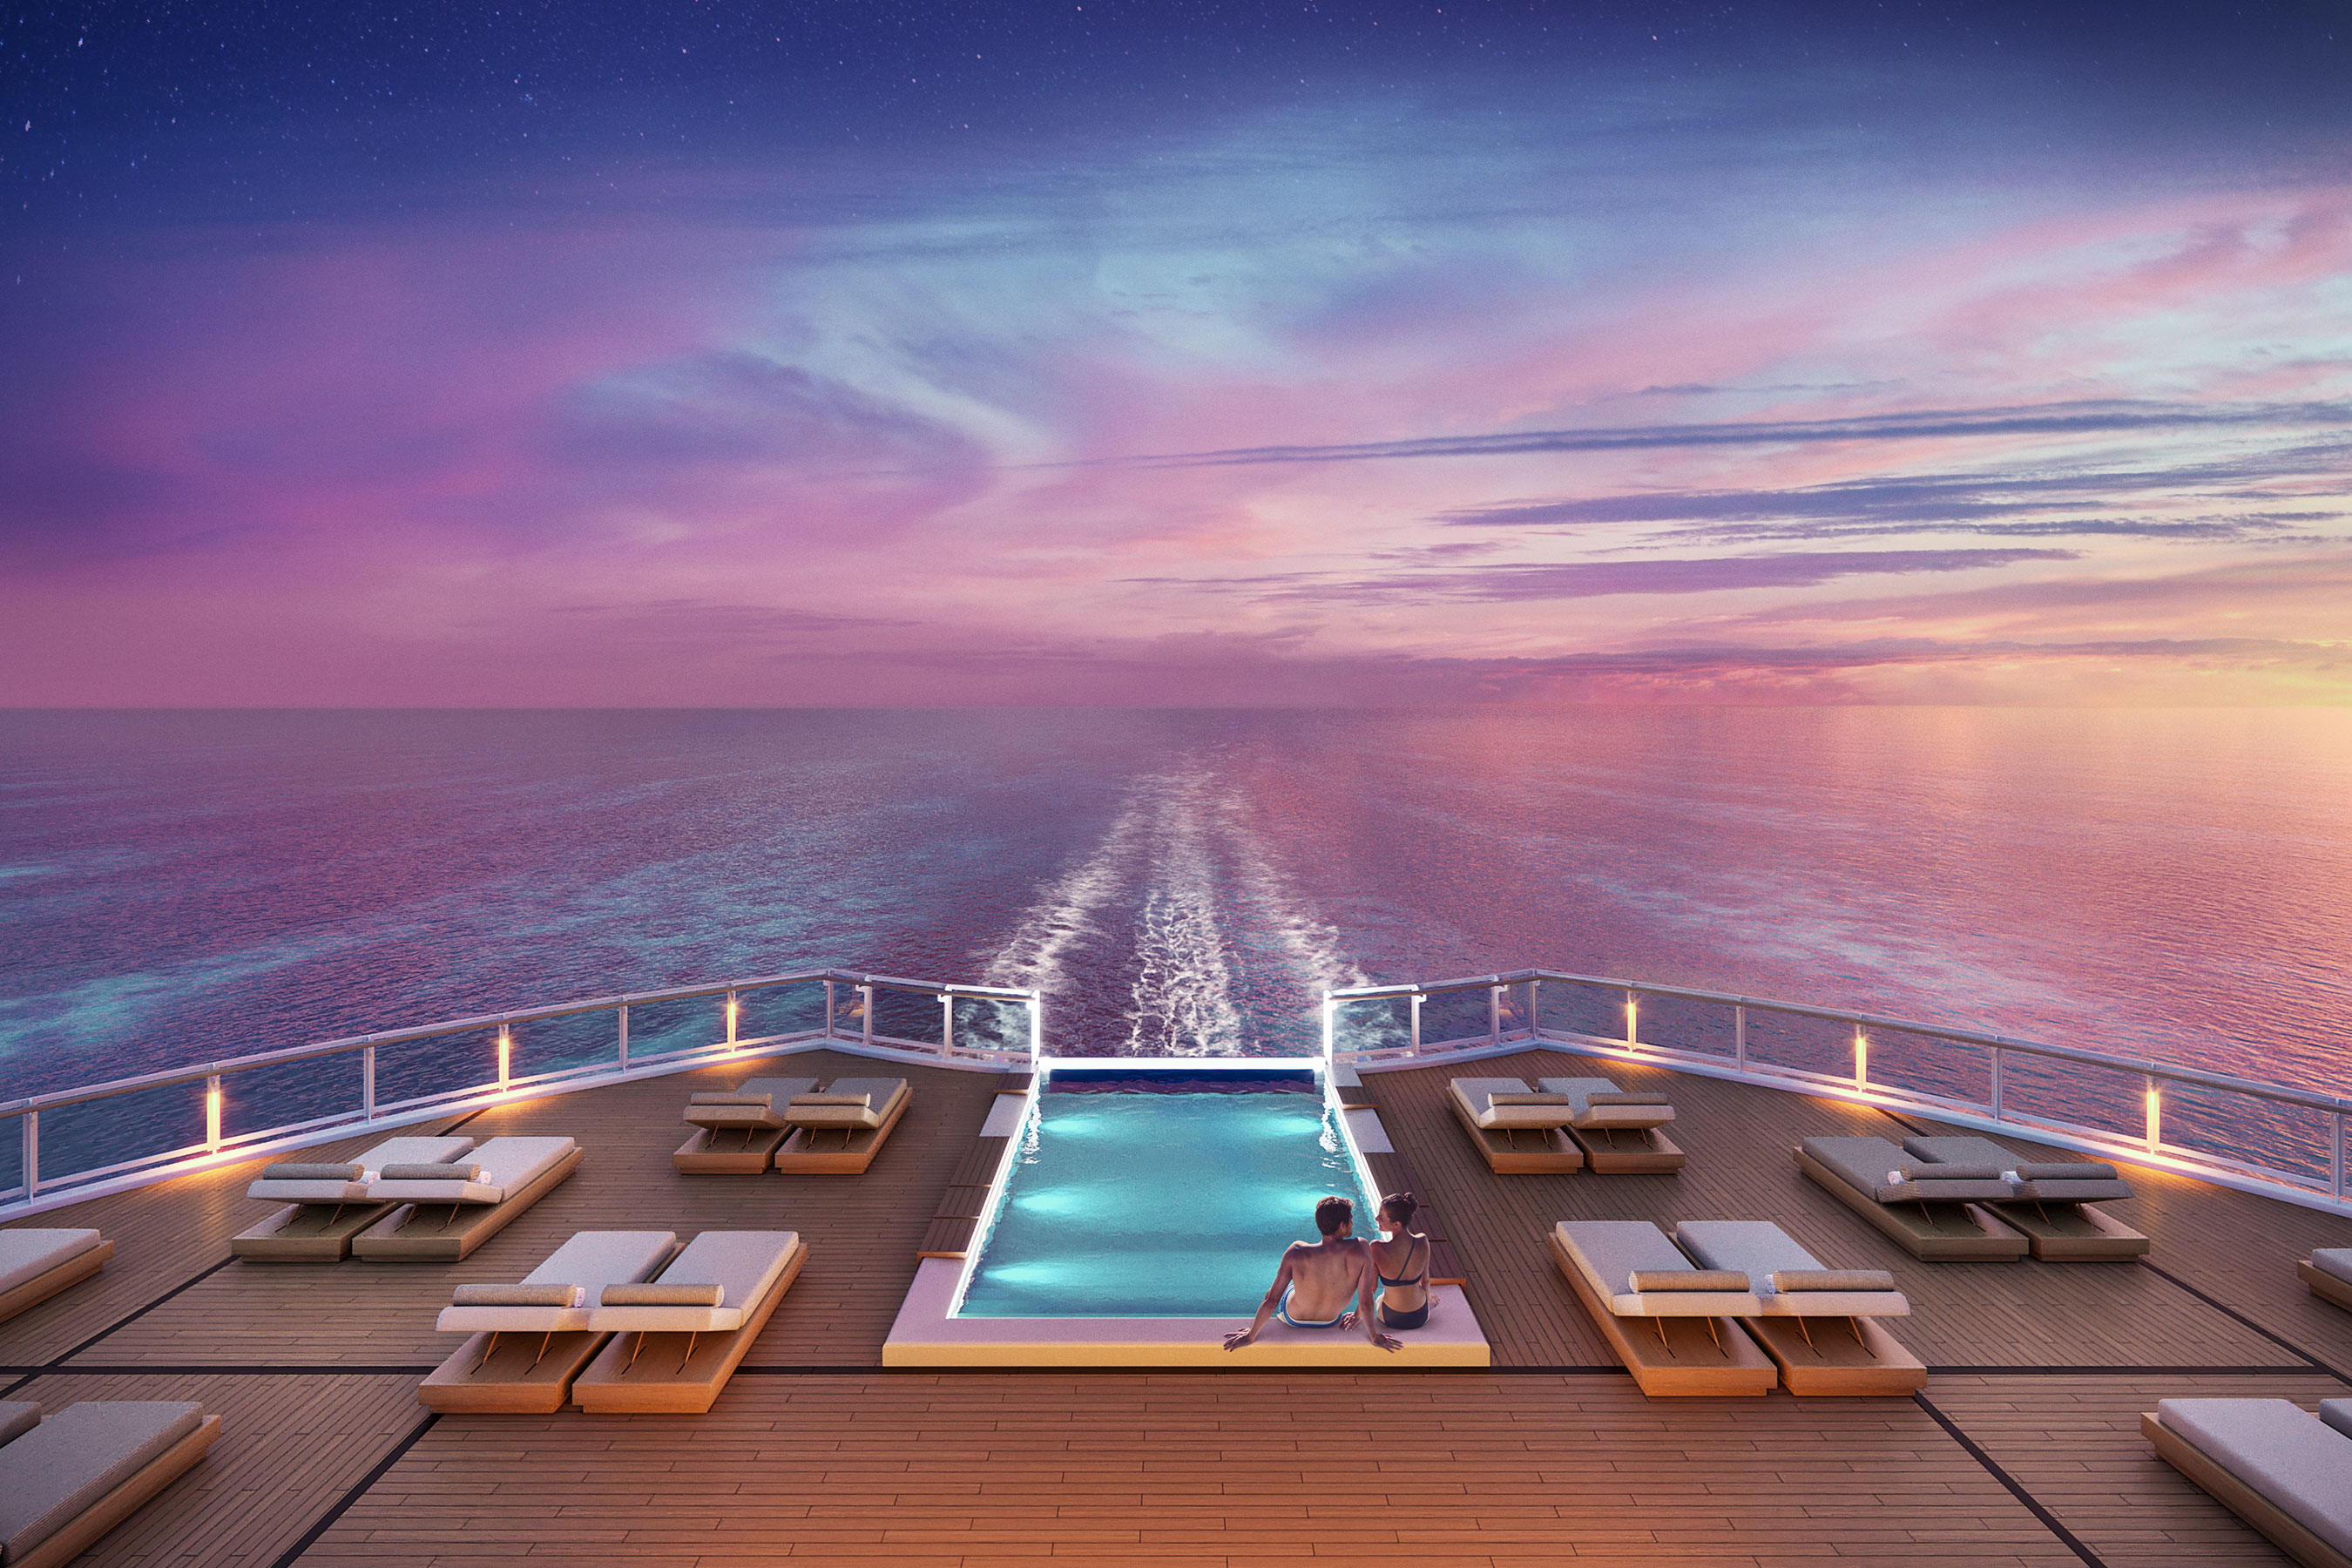 Norwegian Viva will boast a redefined The Haven by Norwegian, NCL's ultra-premium keycard only access ship-within-a-ship concept. The Haven's public areas and 107 suites will feature an expansive sundeck, a stunning infinity pool overlooking the ship's wake and an outdoor spa with a glass-walled sauna and cold room.